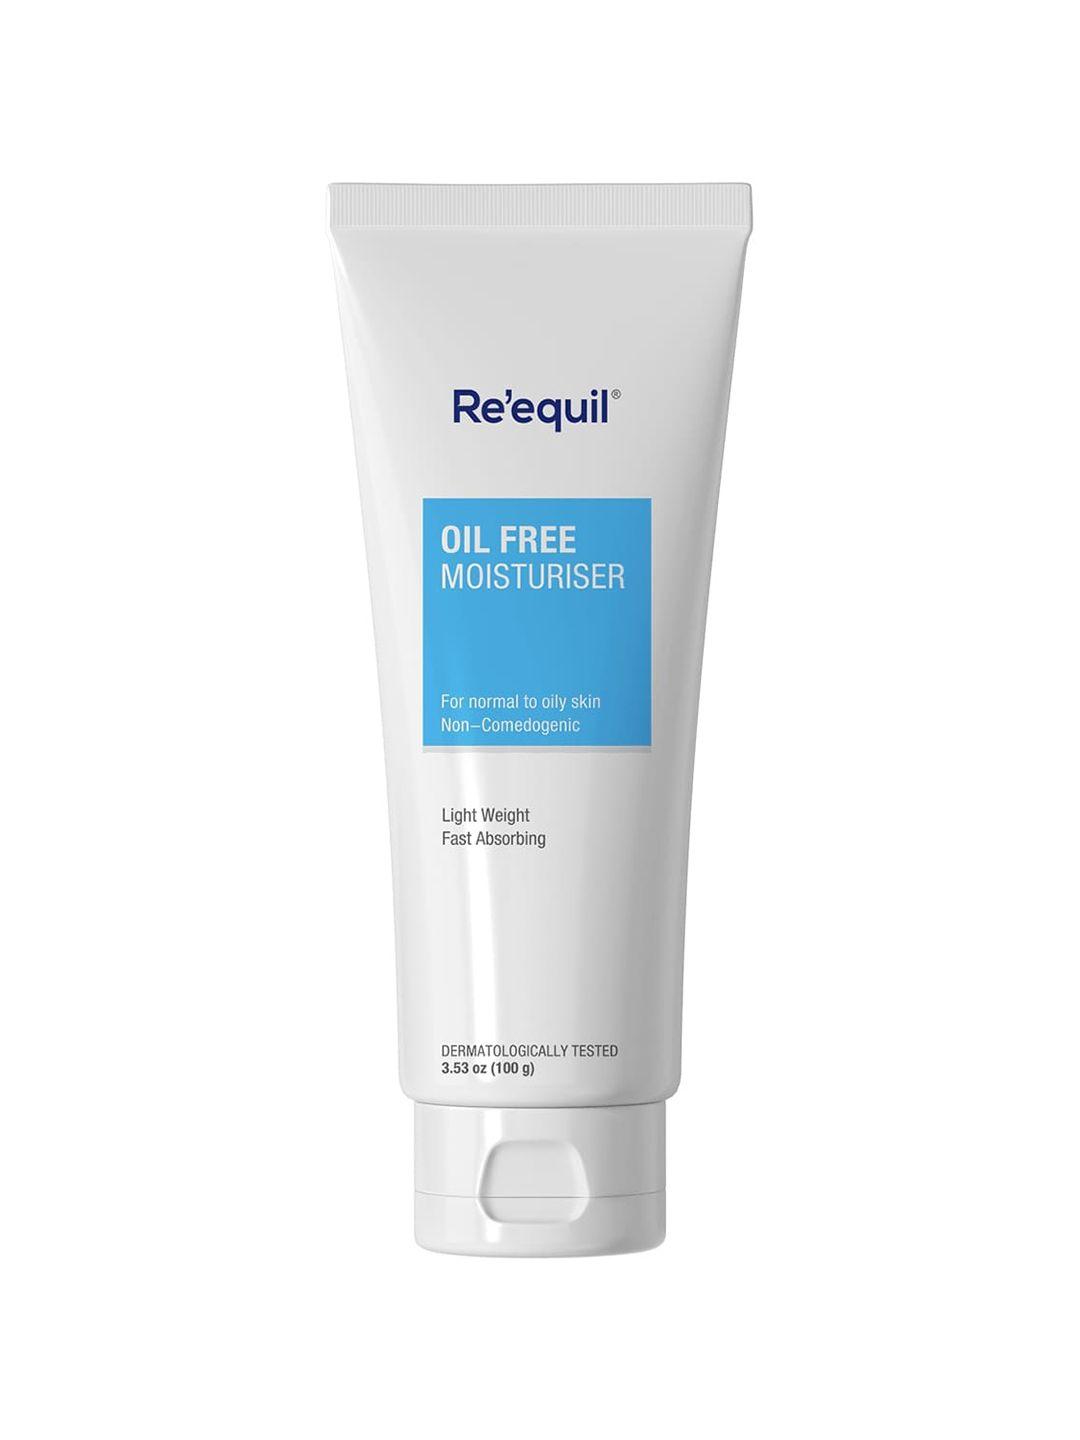 reequil oil free moisturiser for normal, oily & combination skin